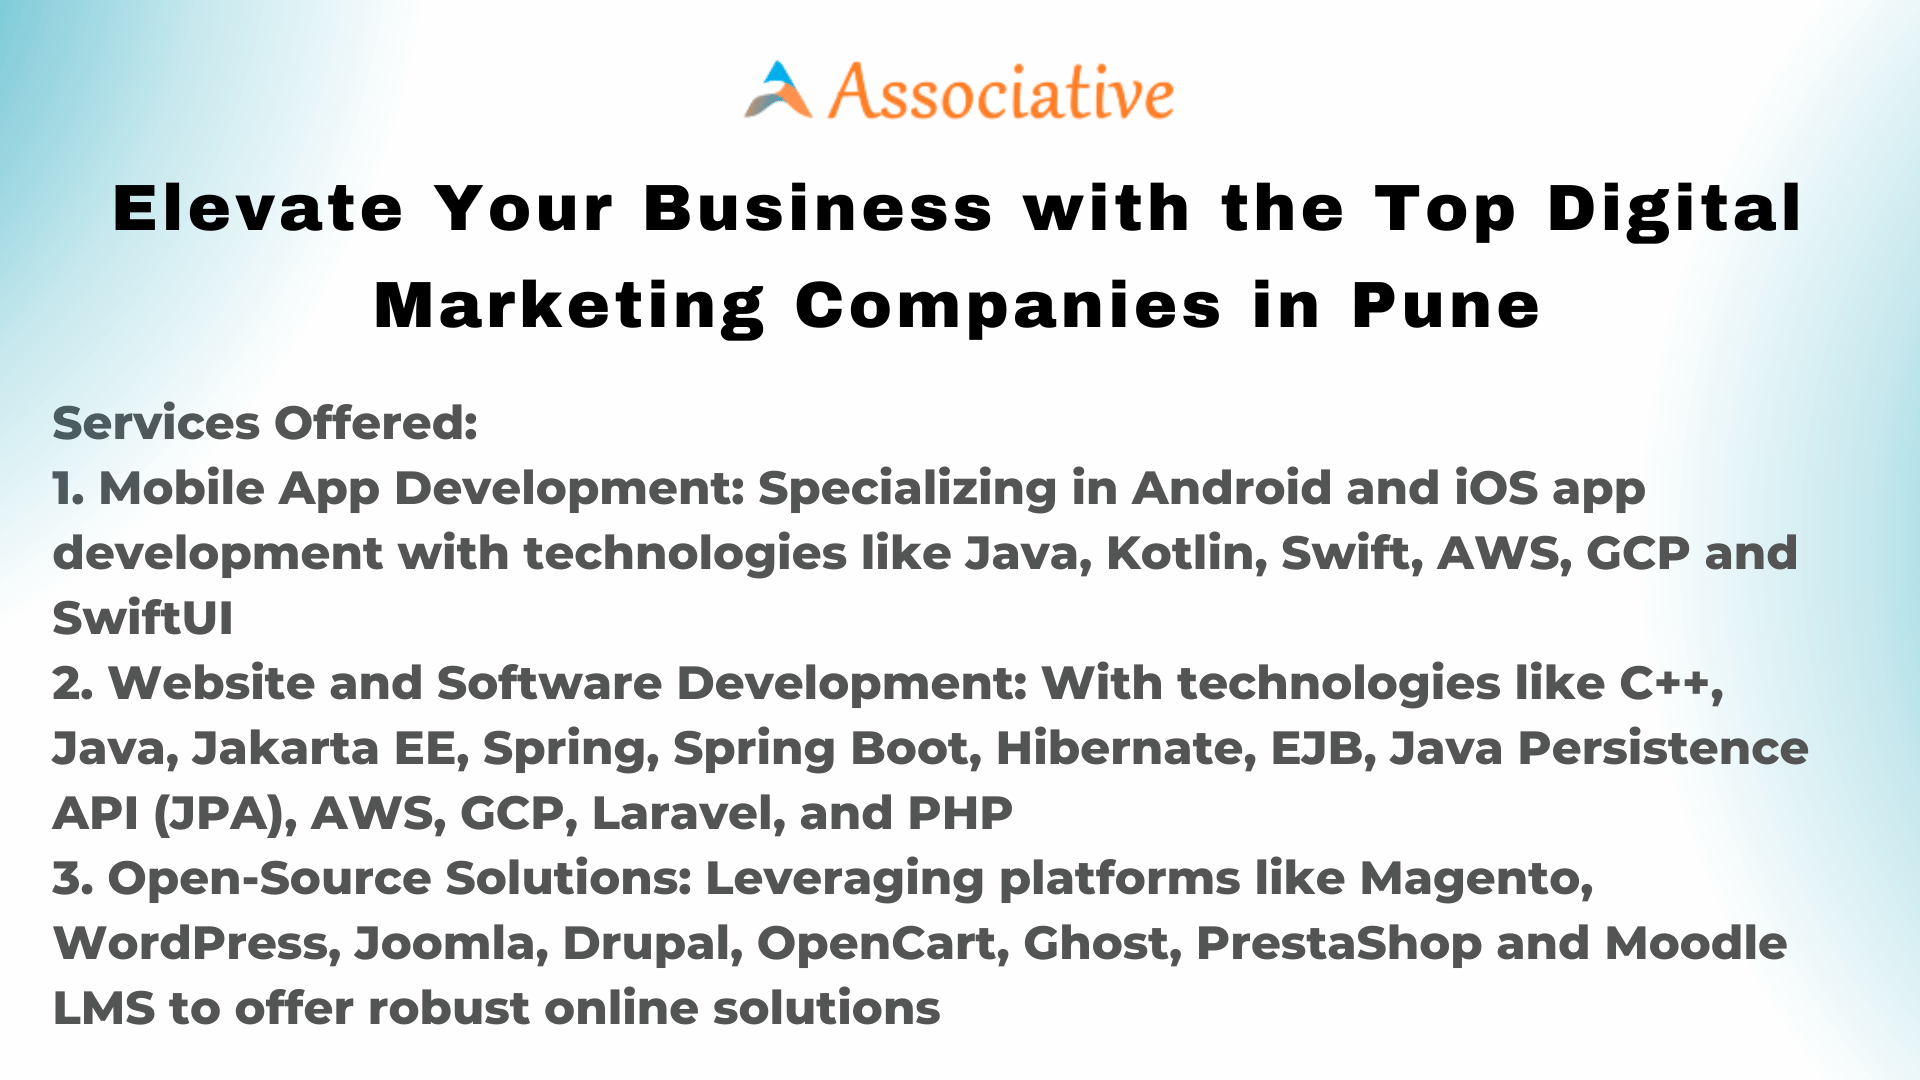 Elevate Your Business with the Top Digital Marketing Companies in Pune